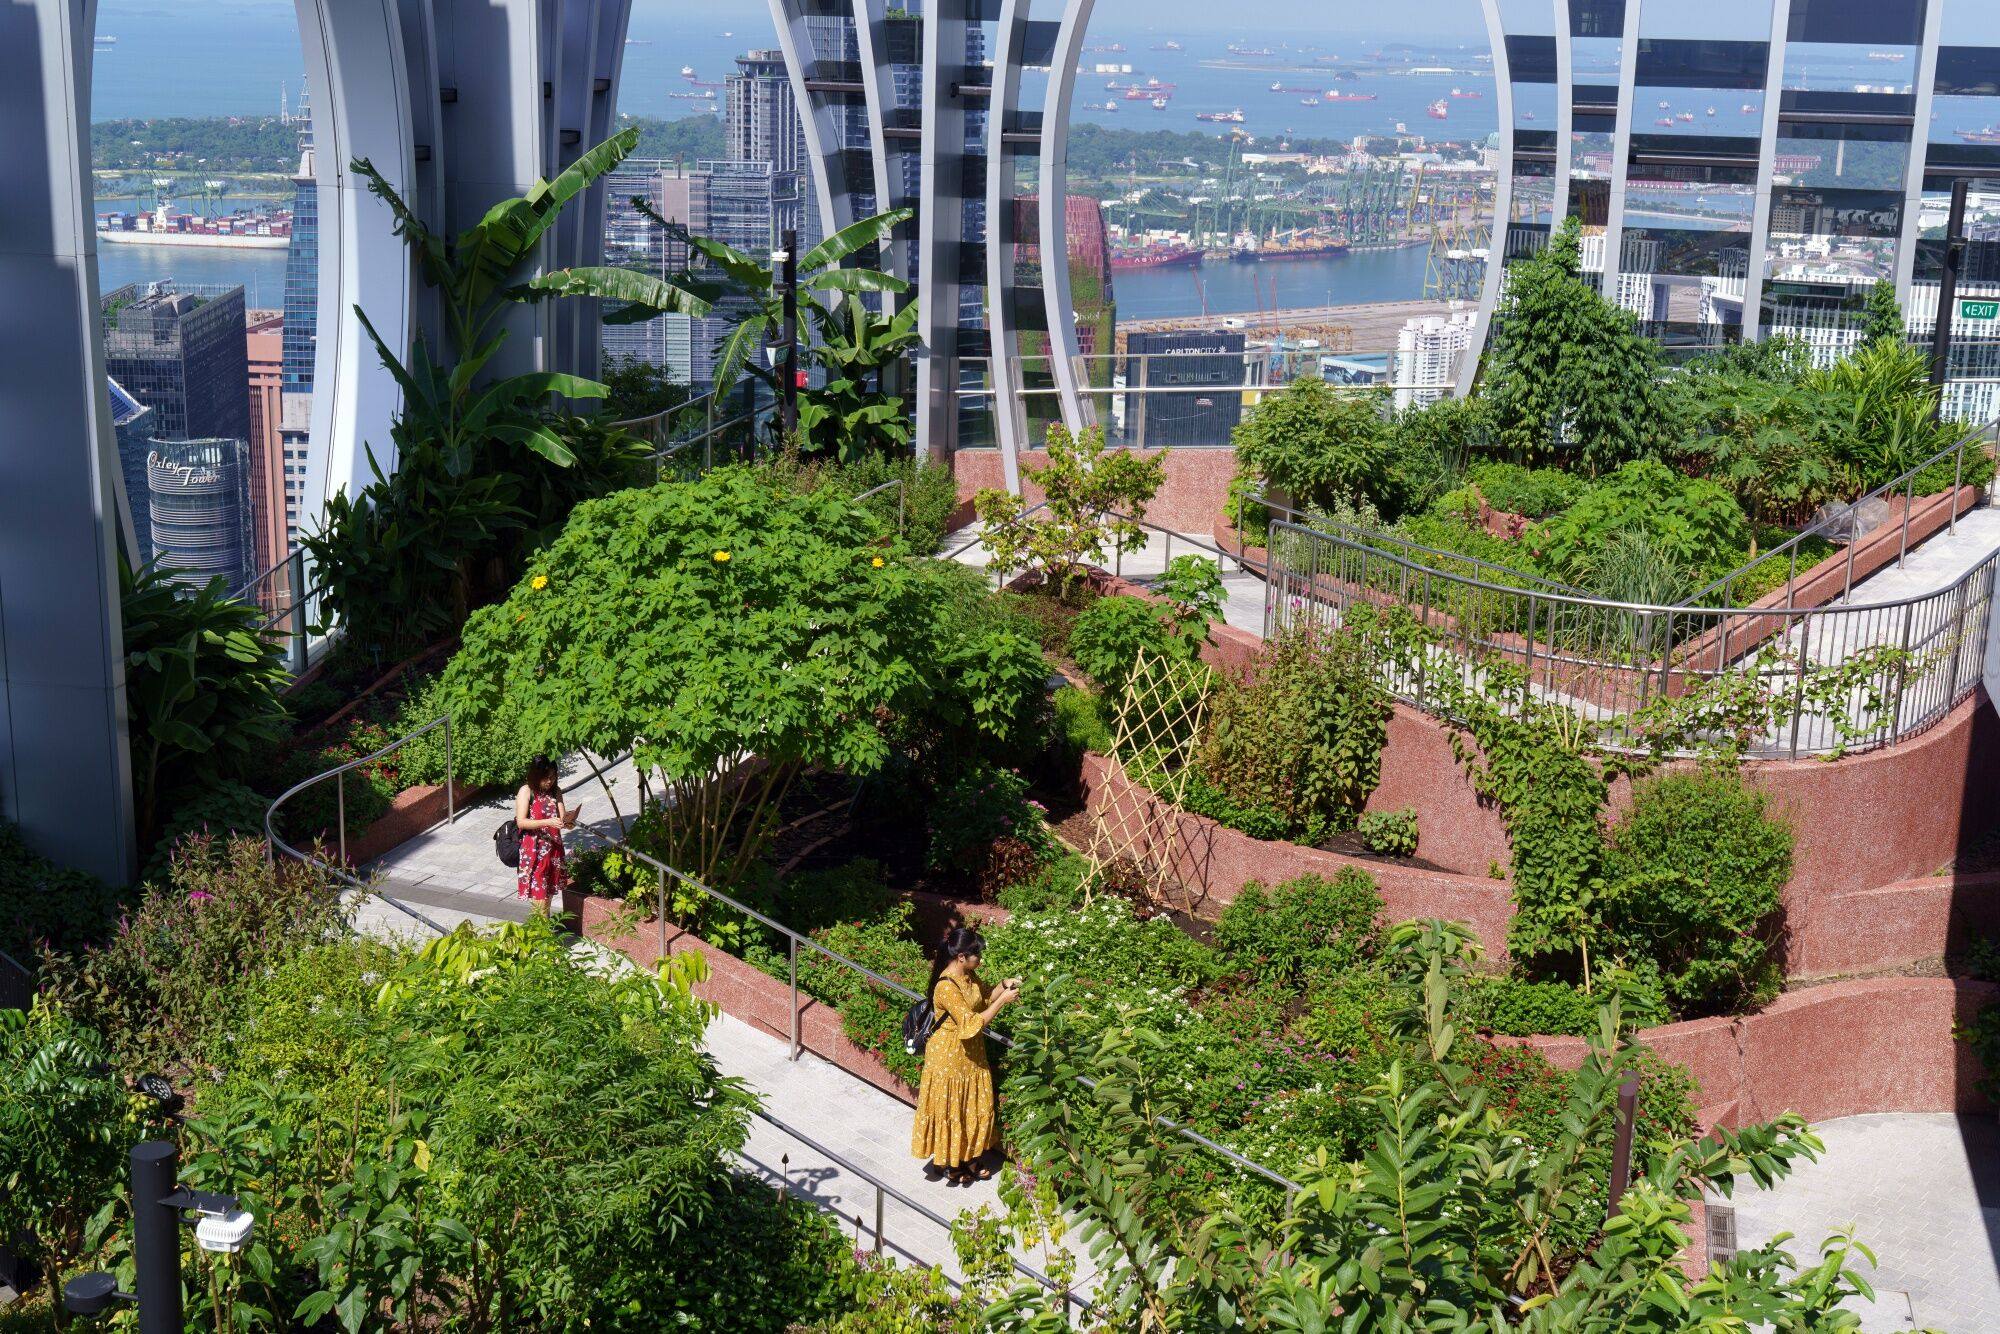 People visit the rooftop garden of a building in Singapore, on June 5. Transforming urban centres into smart and sustainable cities with advanced technologies has become a common objective for many cities globally. Photo: Bloomberg